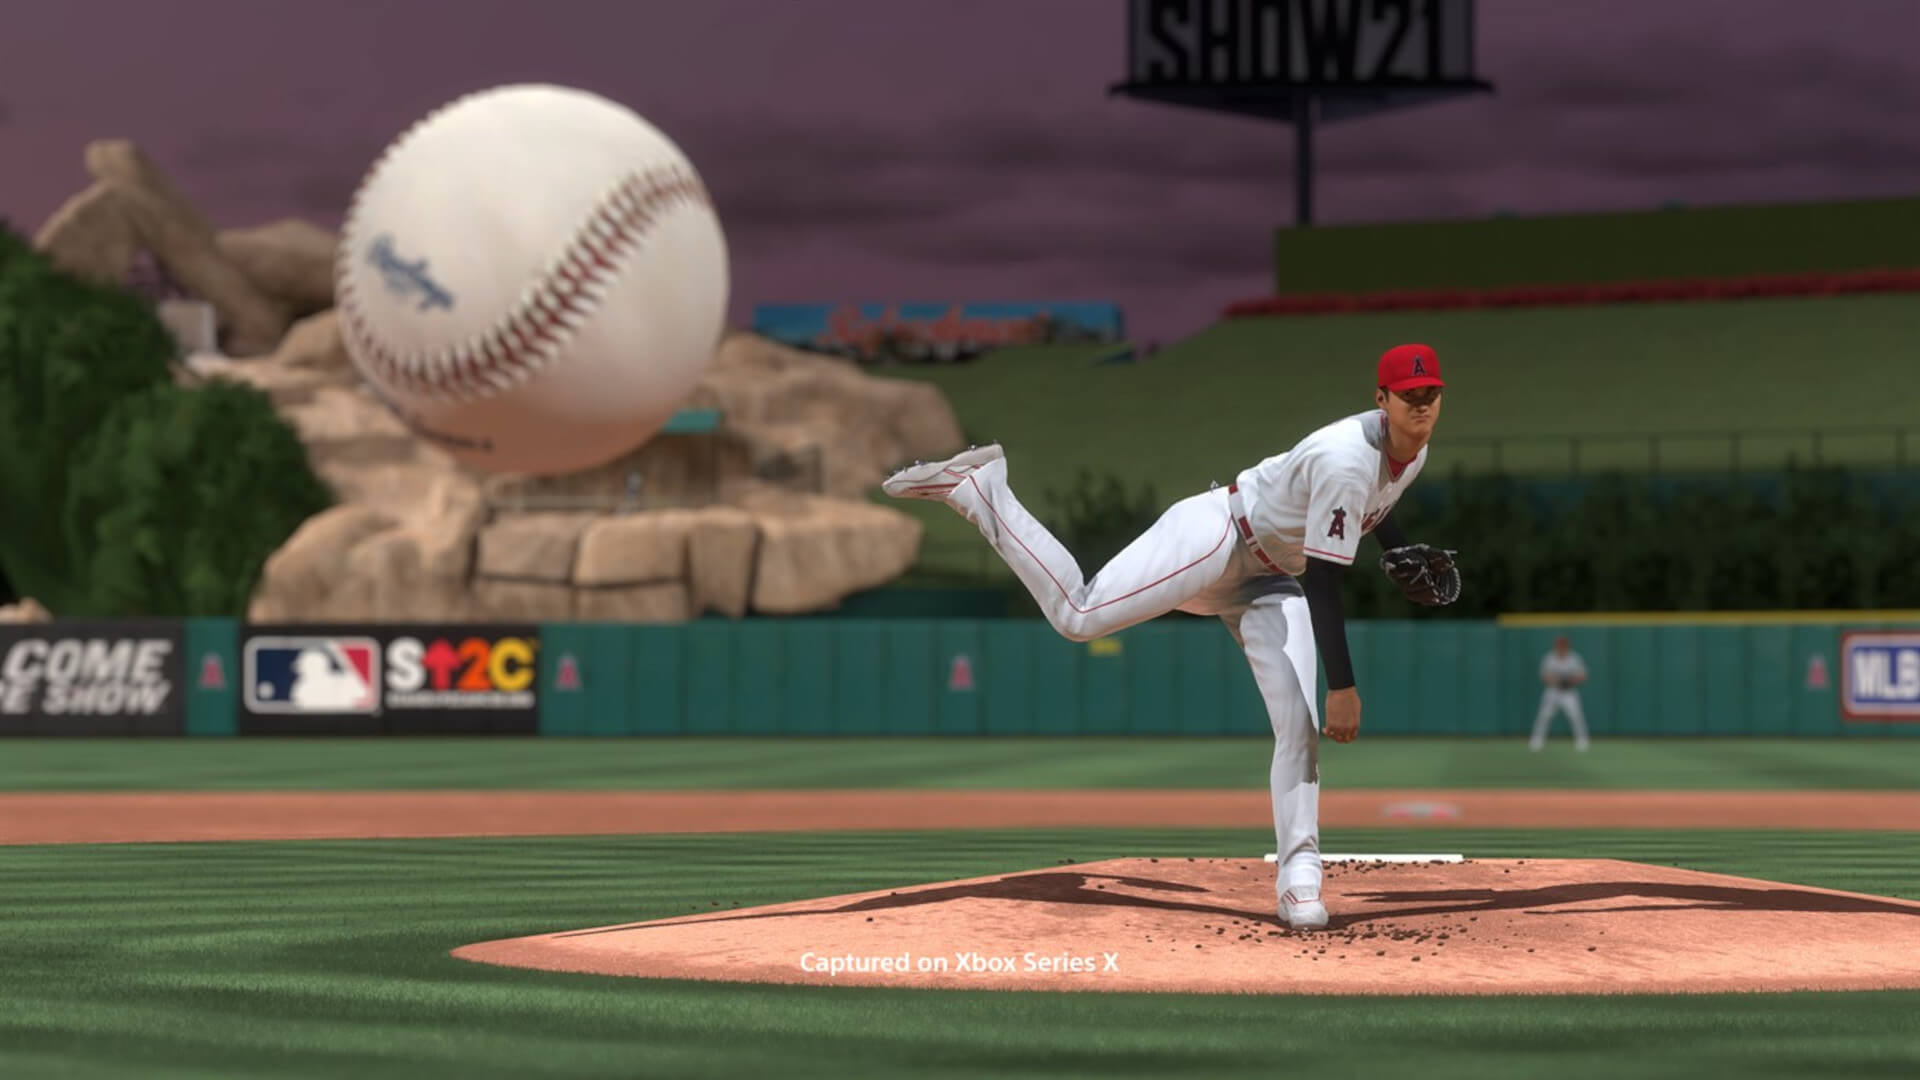 MLB: The Show 21, the first entry in the long-running baseball series to hit Xbox and PC